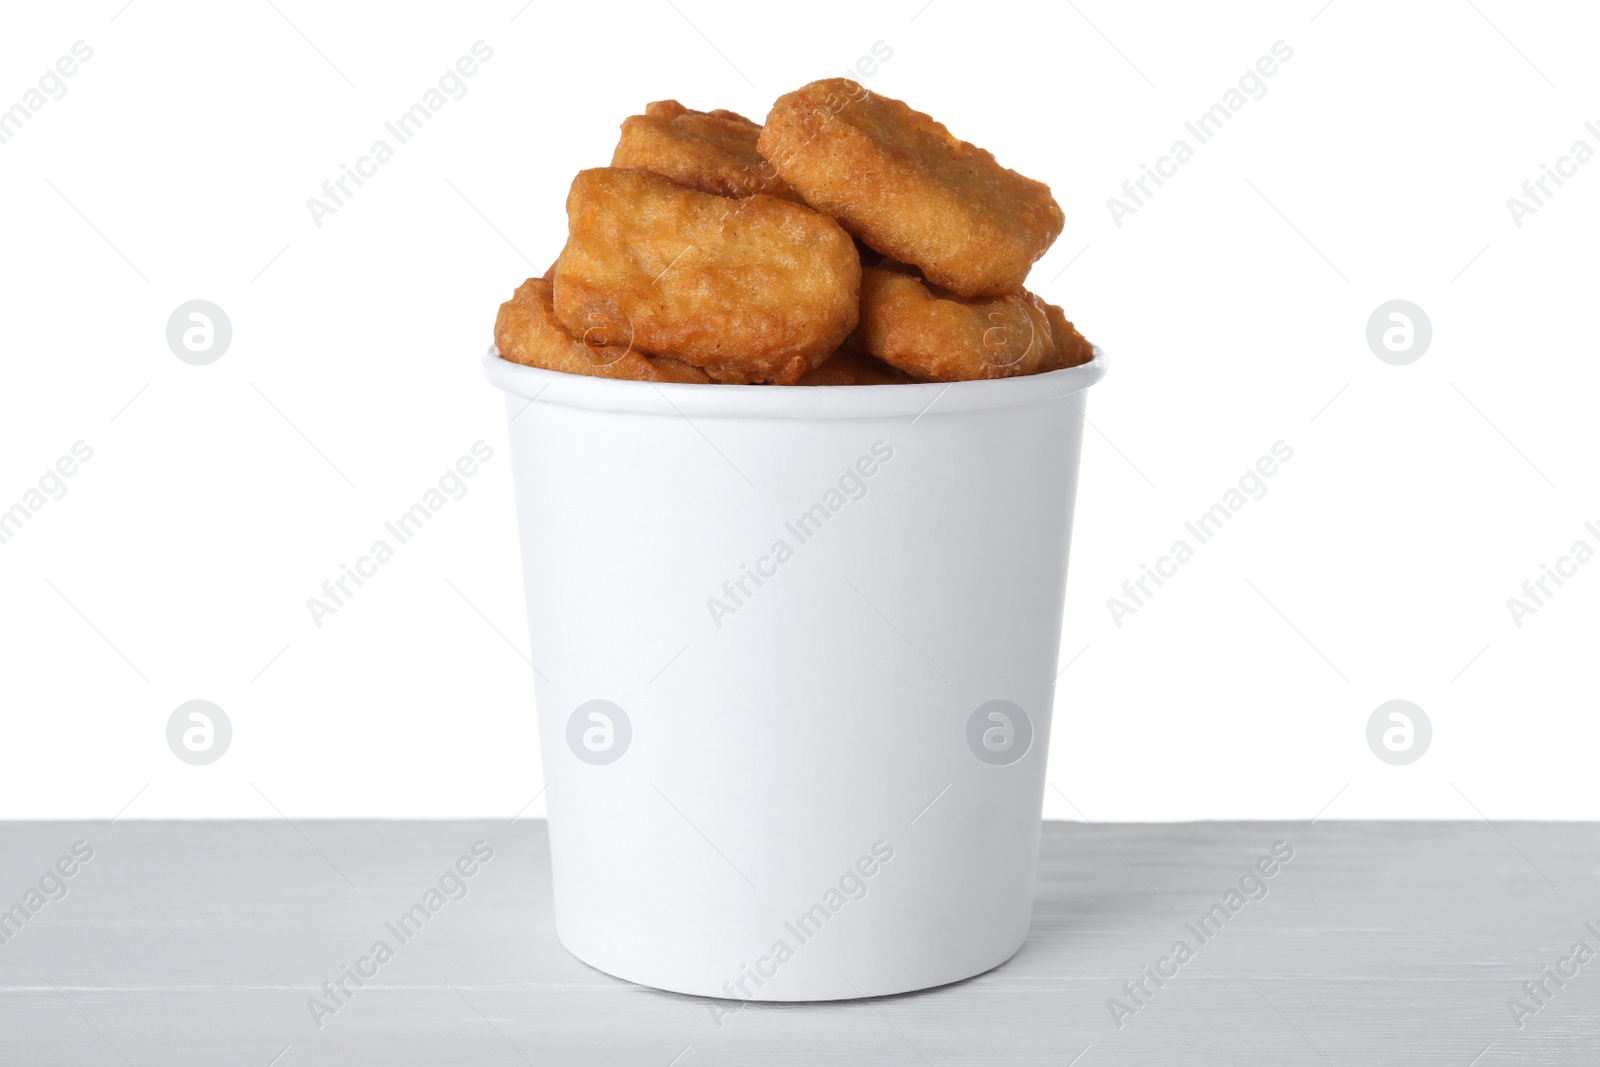 Photo of Bucket with tasty chicken nuggets on wooden table against white background